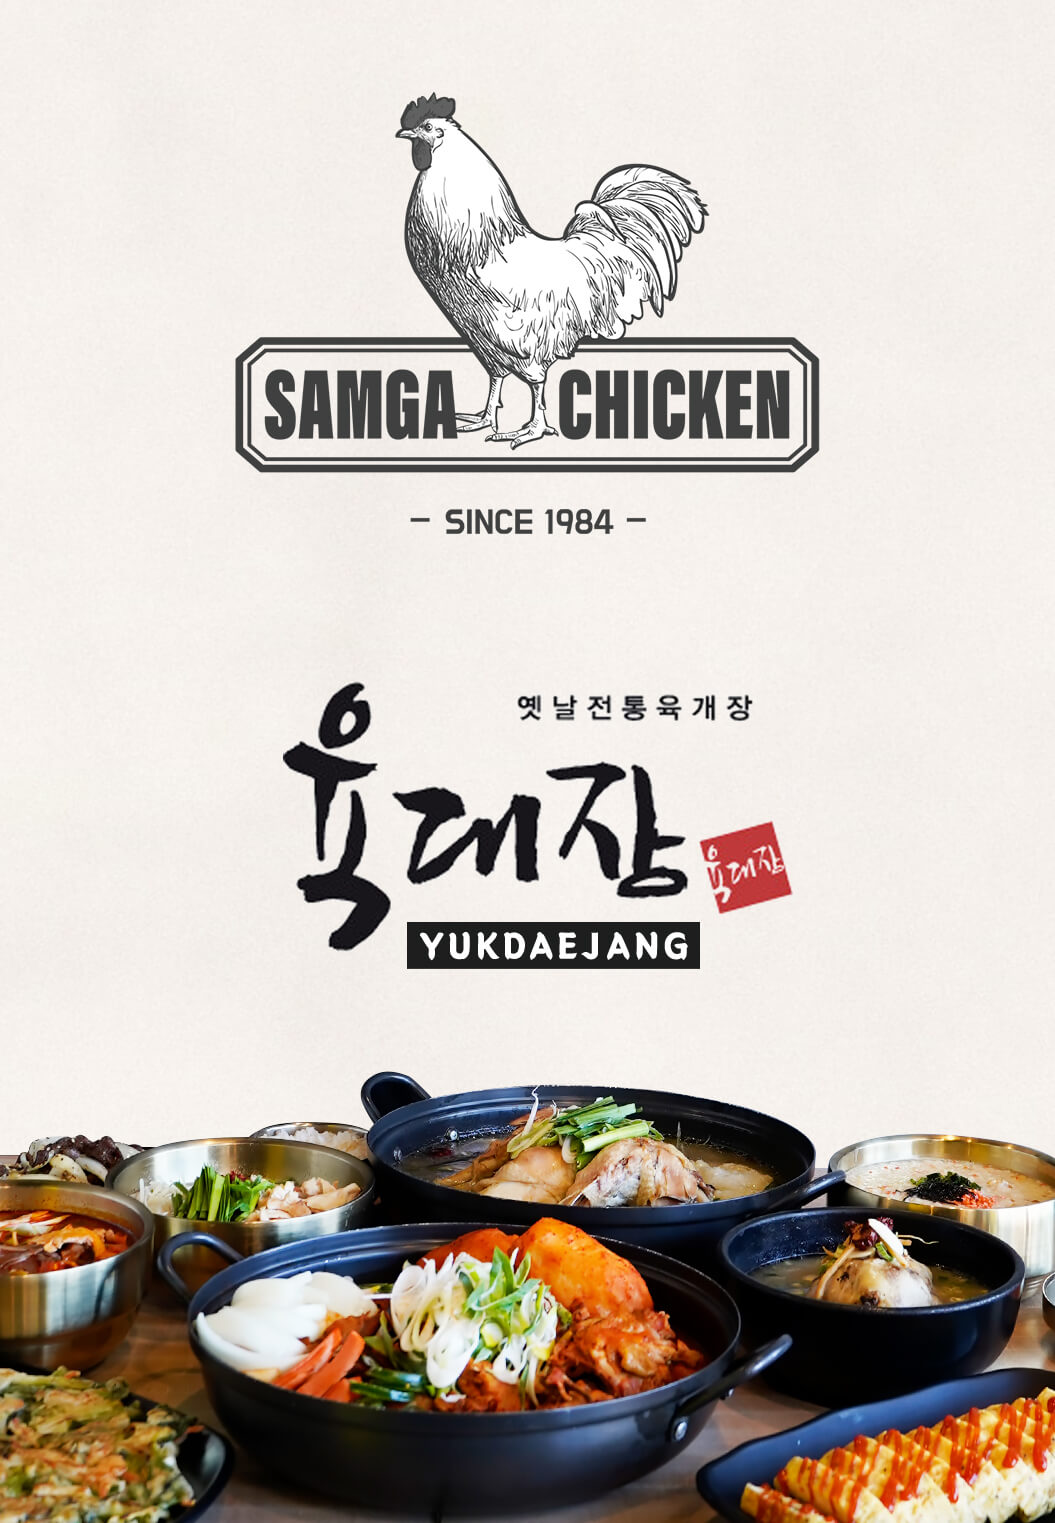 Chicken dishes with logos